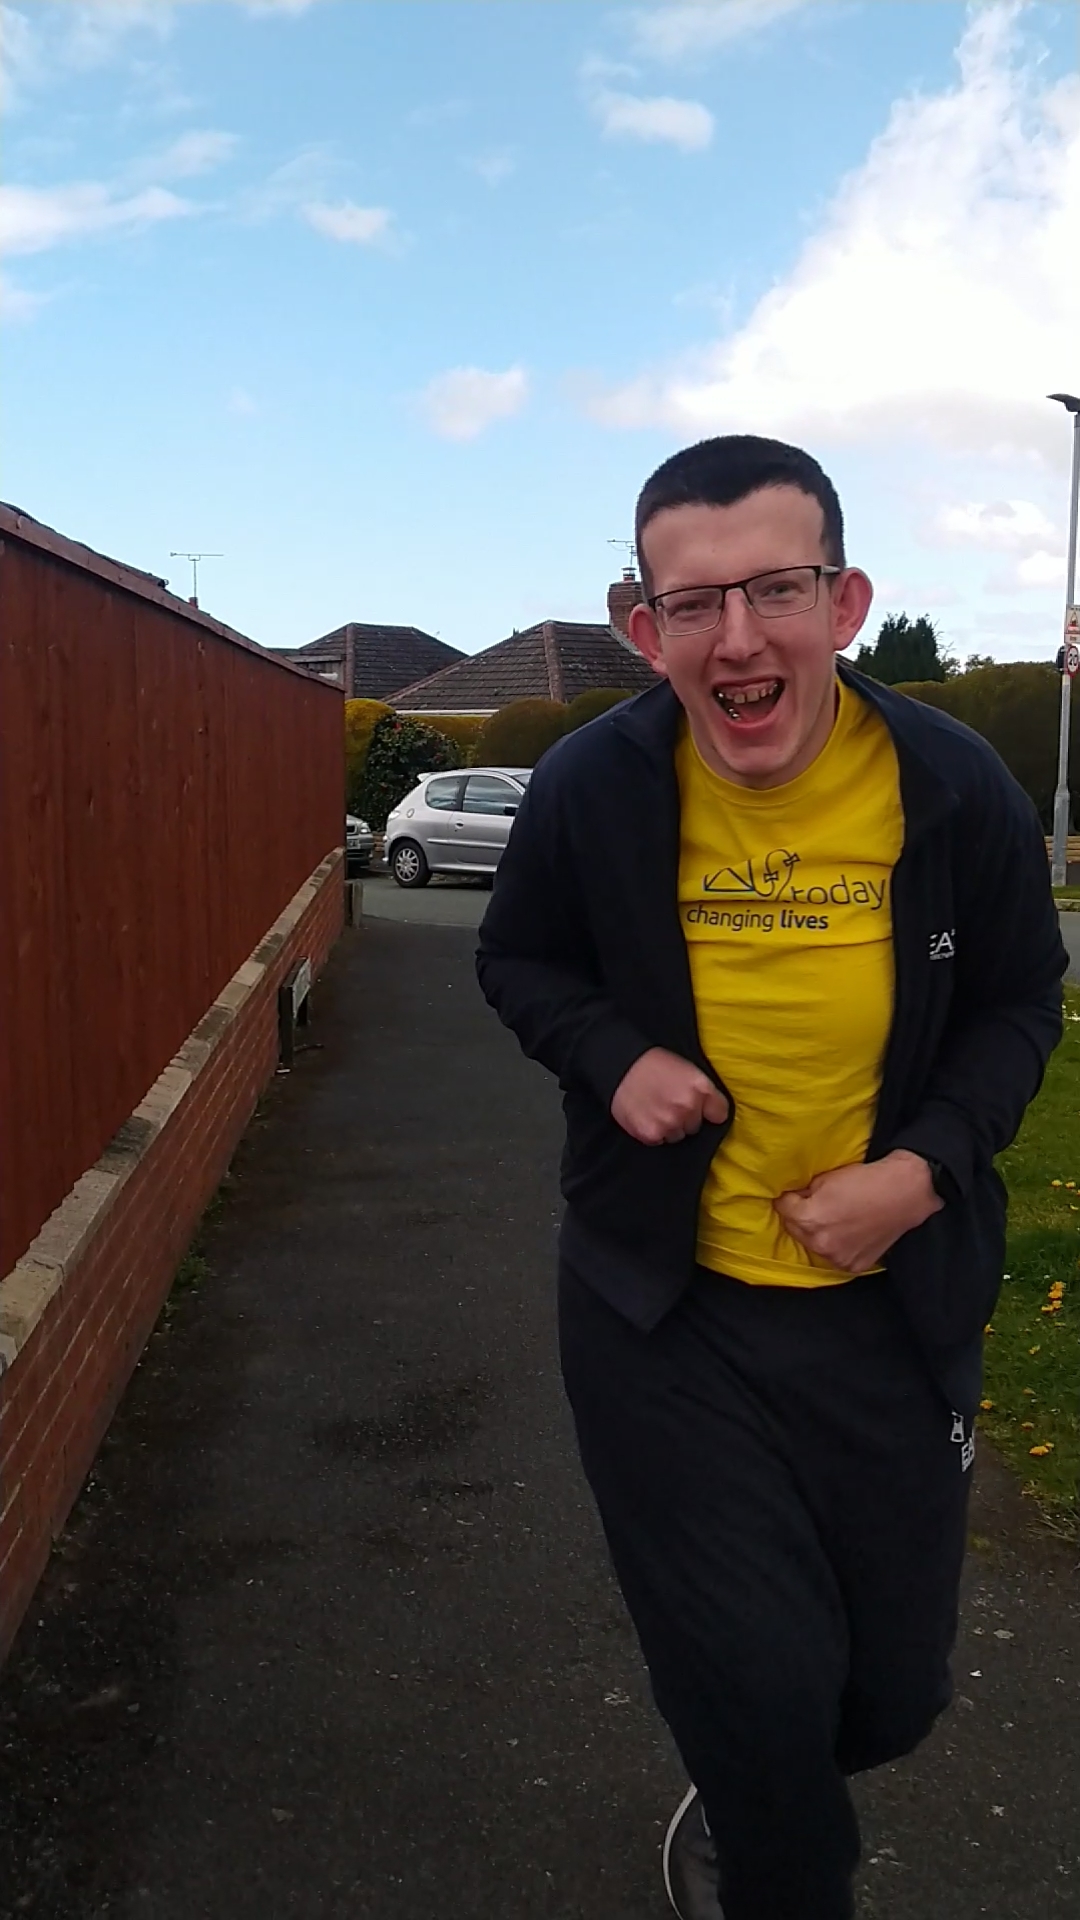 Loyd, from Great Sutton, has challenged himself to walk 10k instead of 5k this May.